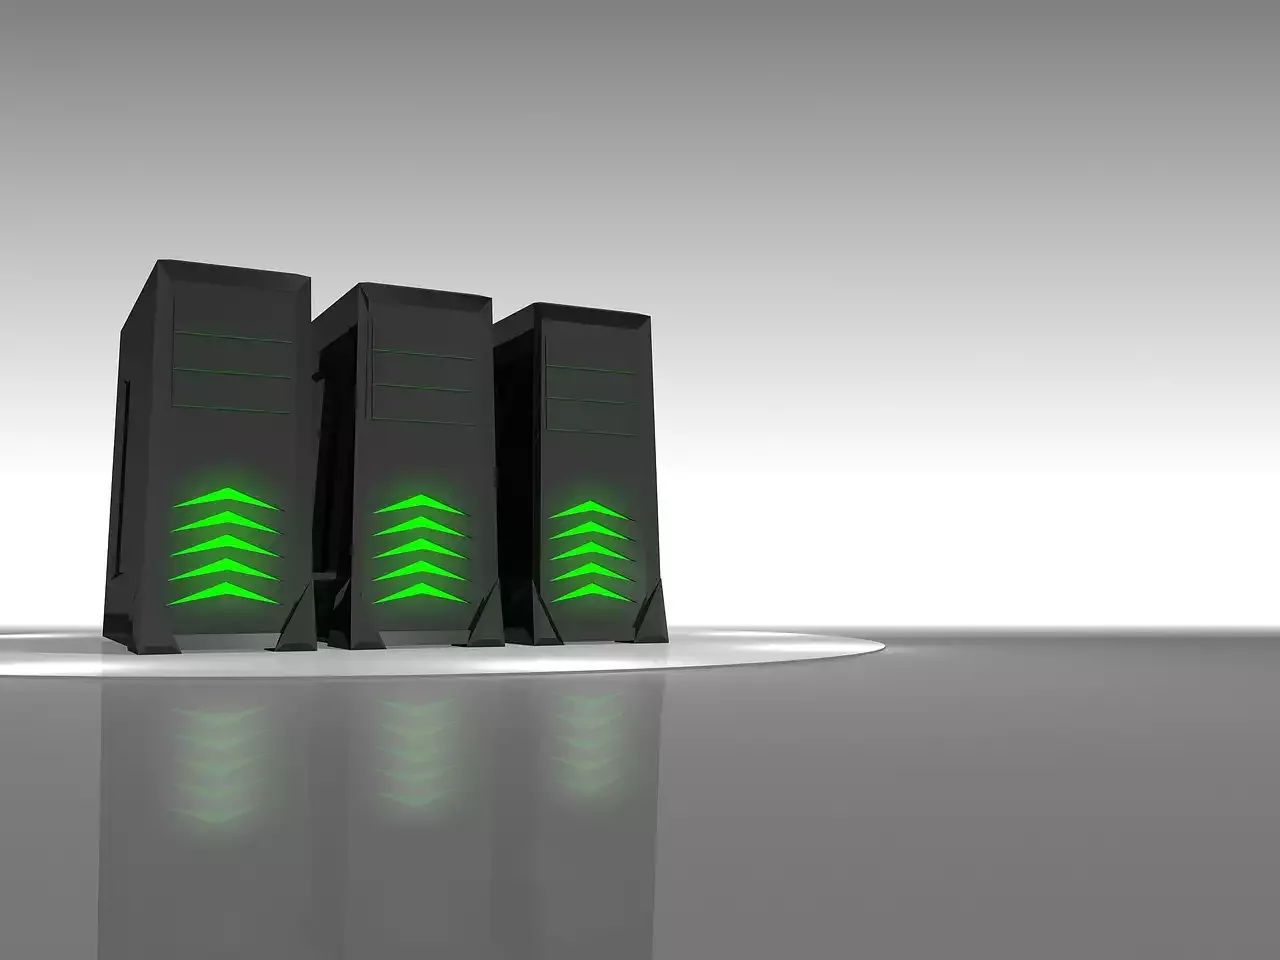 Top 5 Shared Hosting Providers in 2023